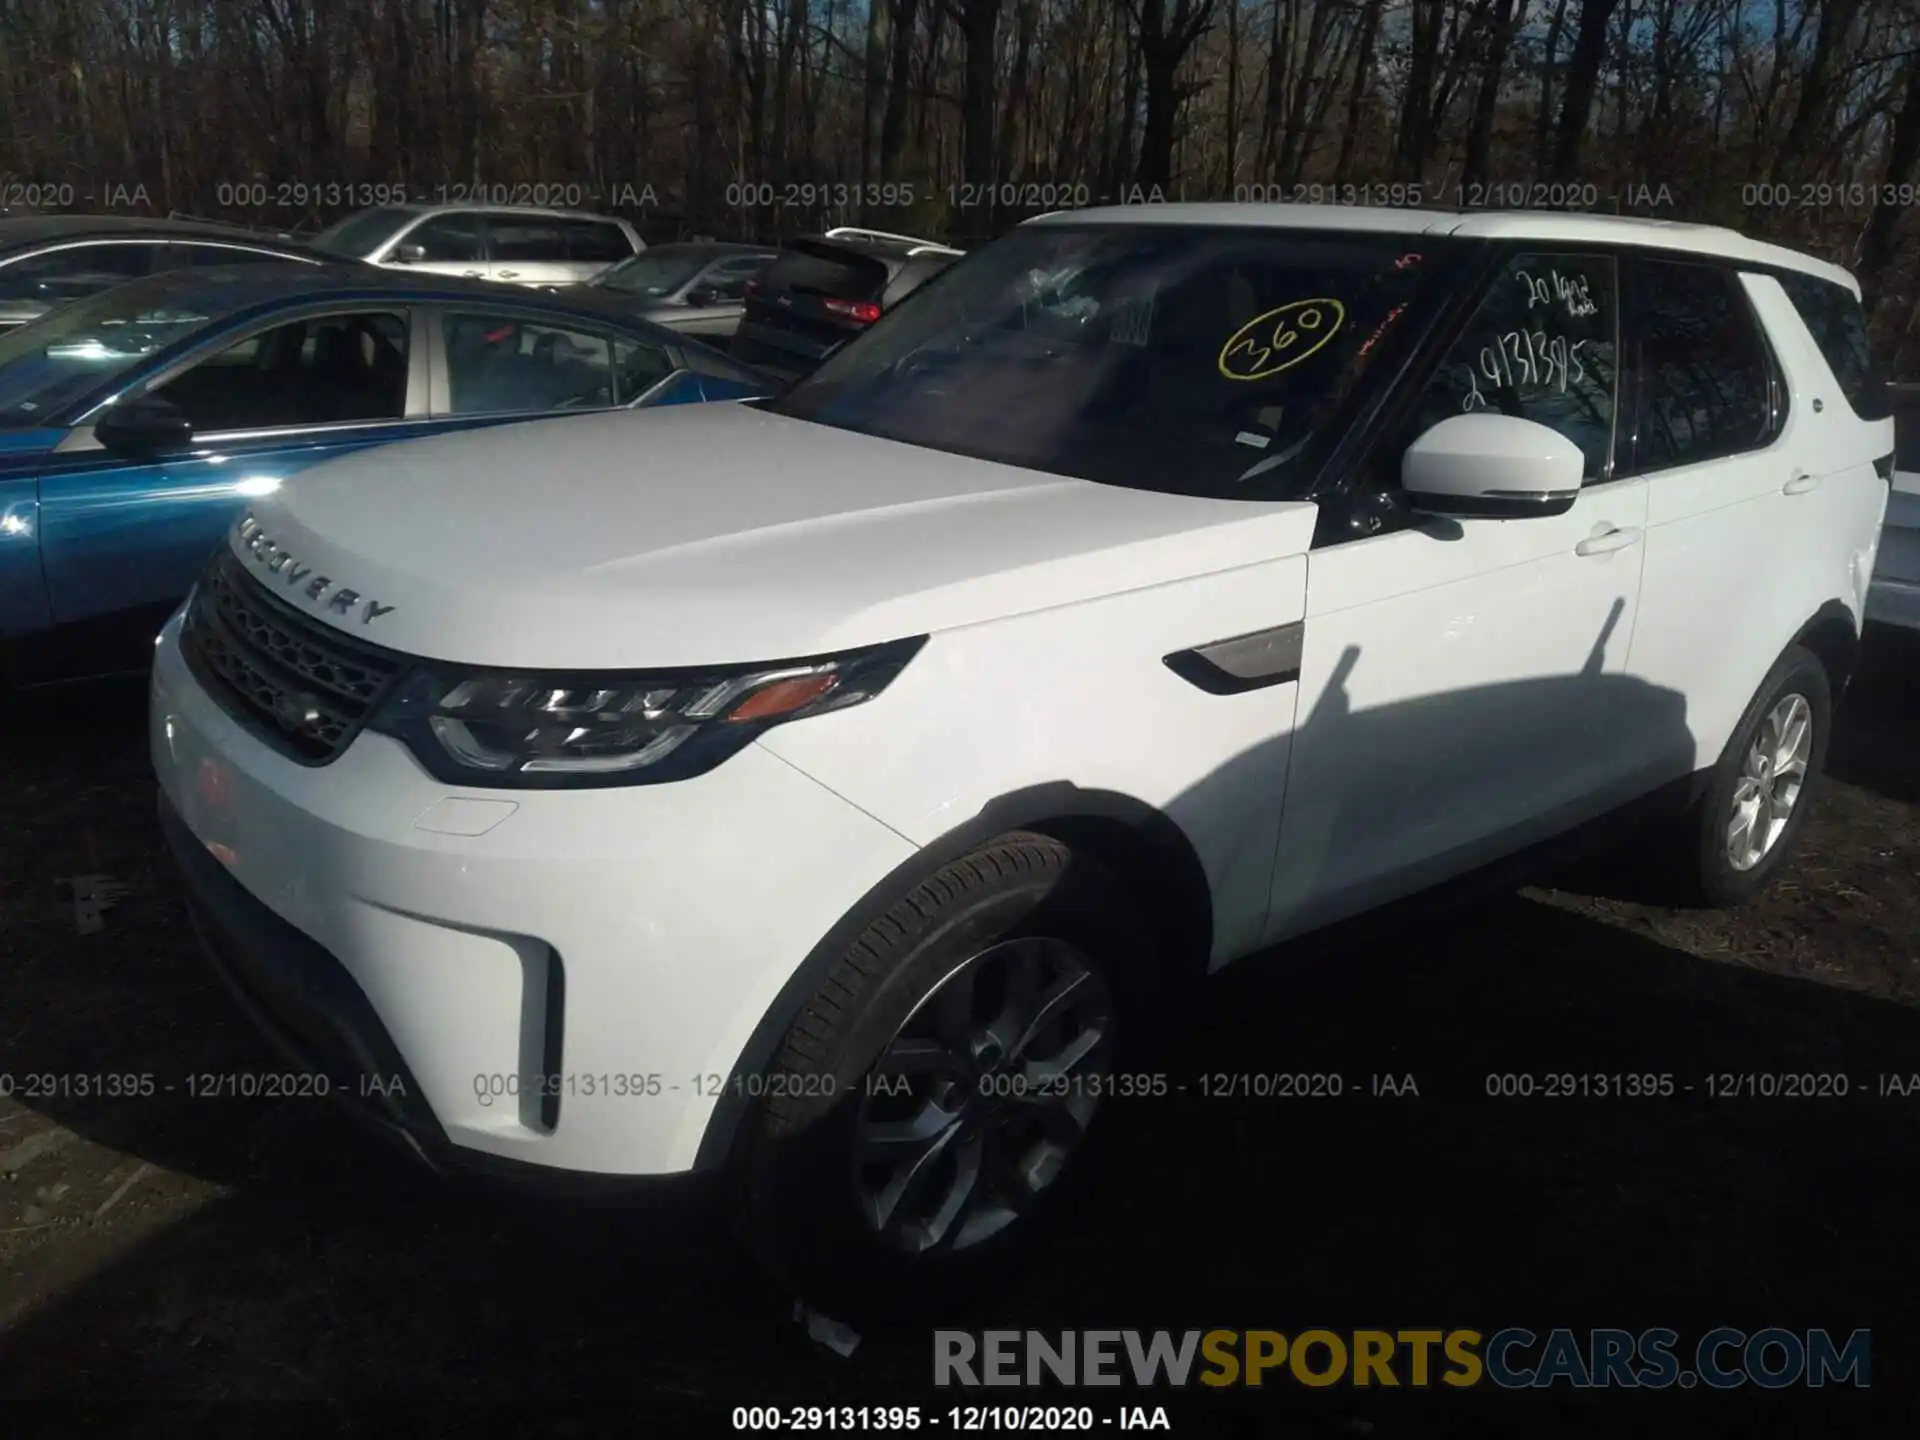 2 Photograph of a damaged car SALRG2RV8L2425285 LAND ROVER DISCOVERY 2020